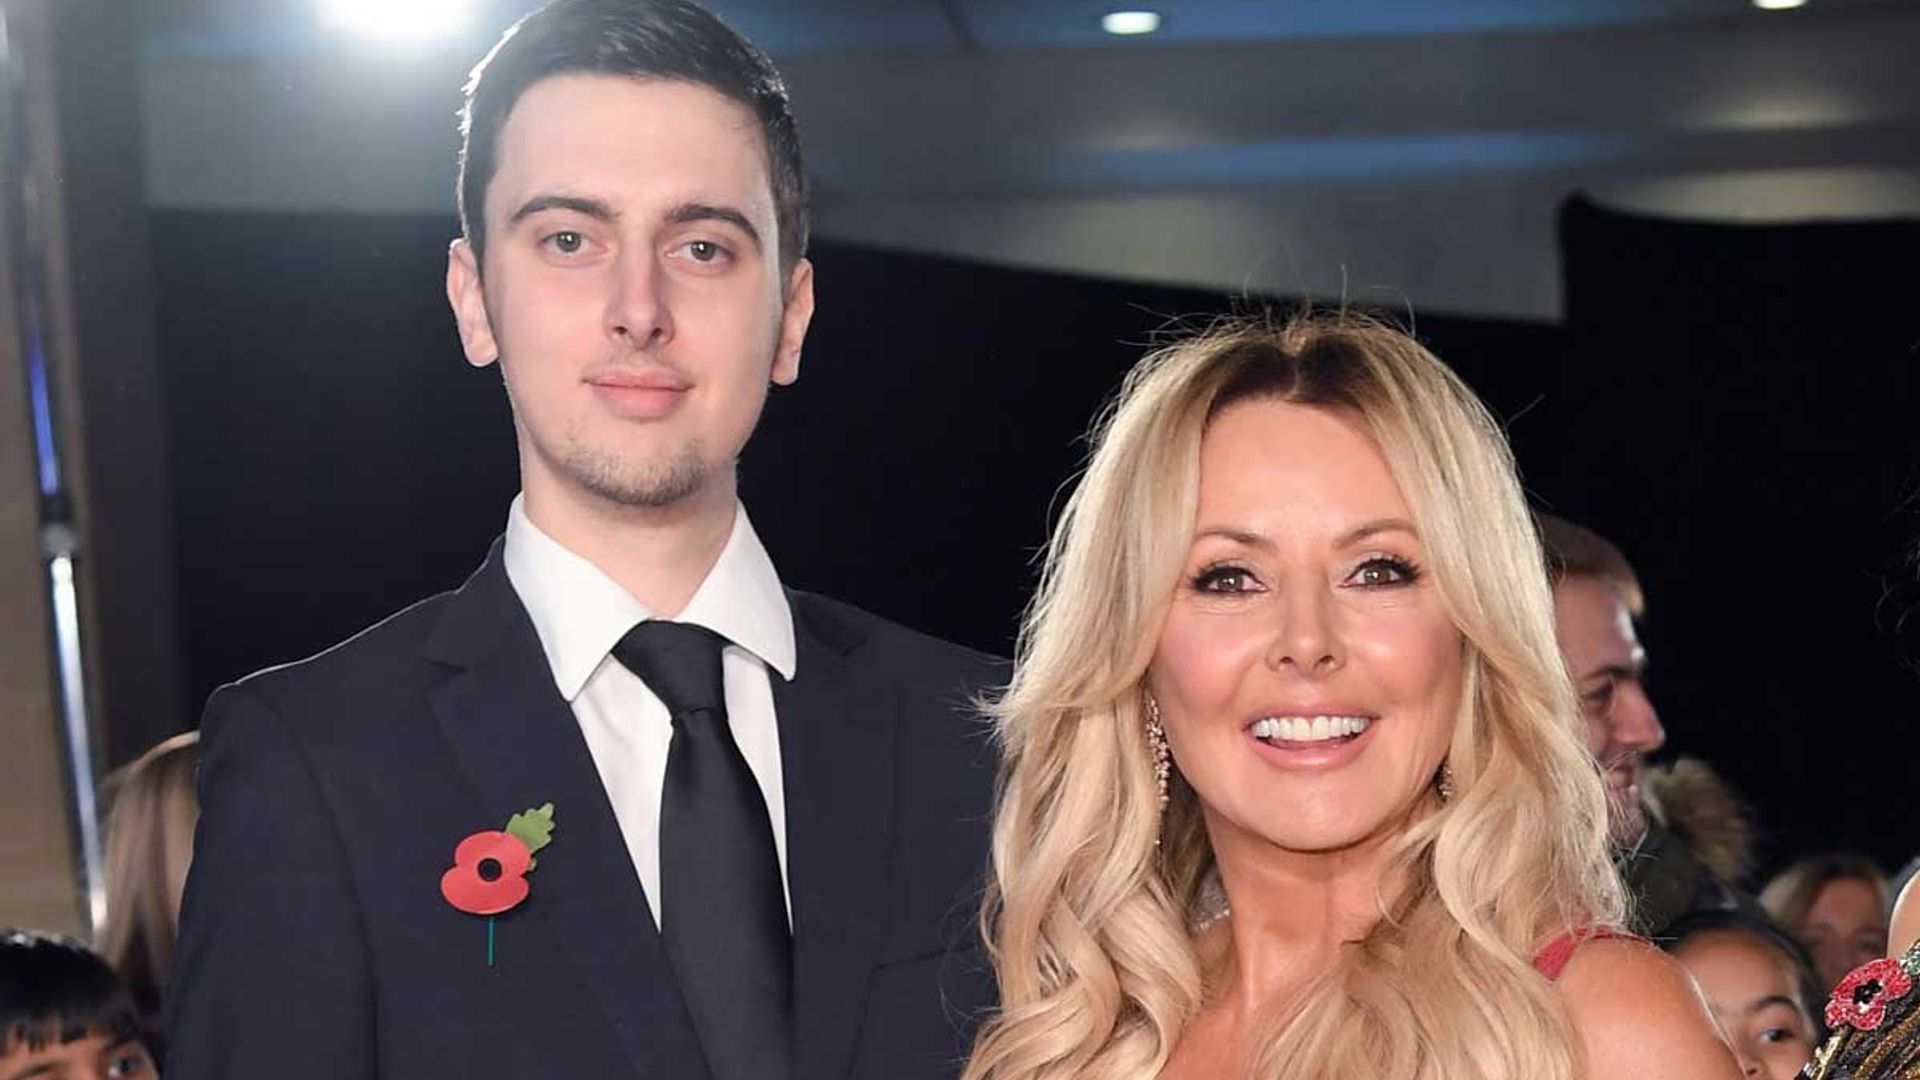 Carol Vorderman celebrates son Cameron's master's degree with jaw-dropping chocolate cake